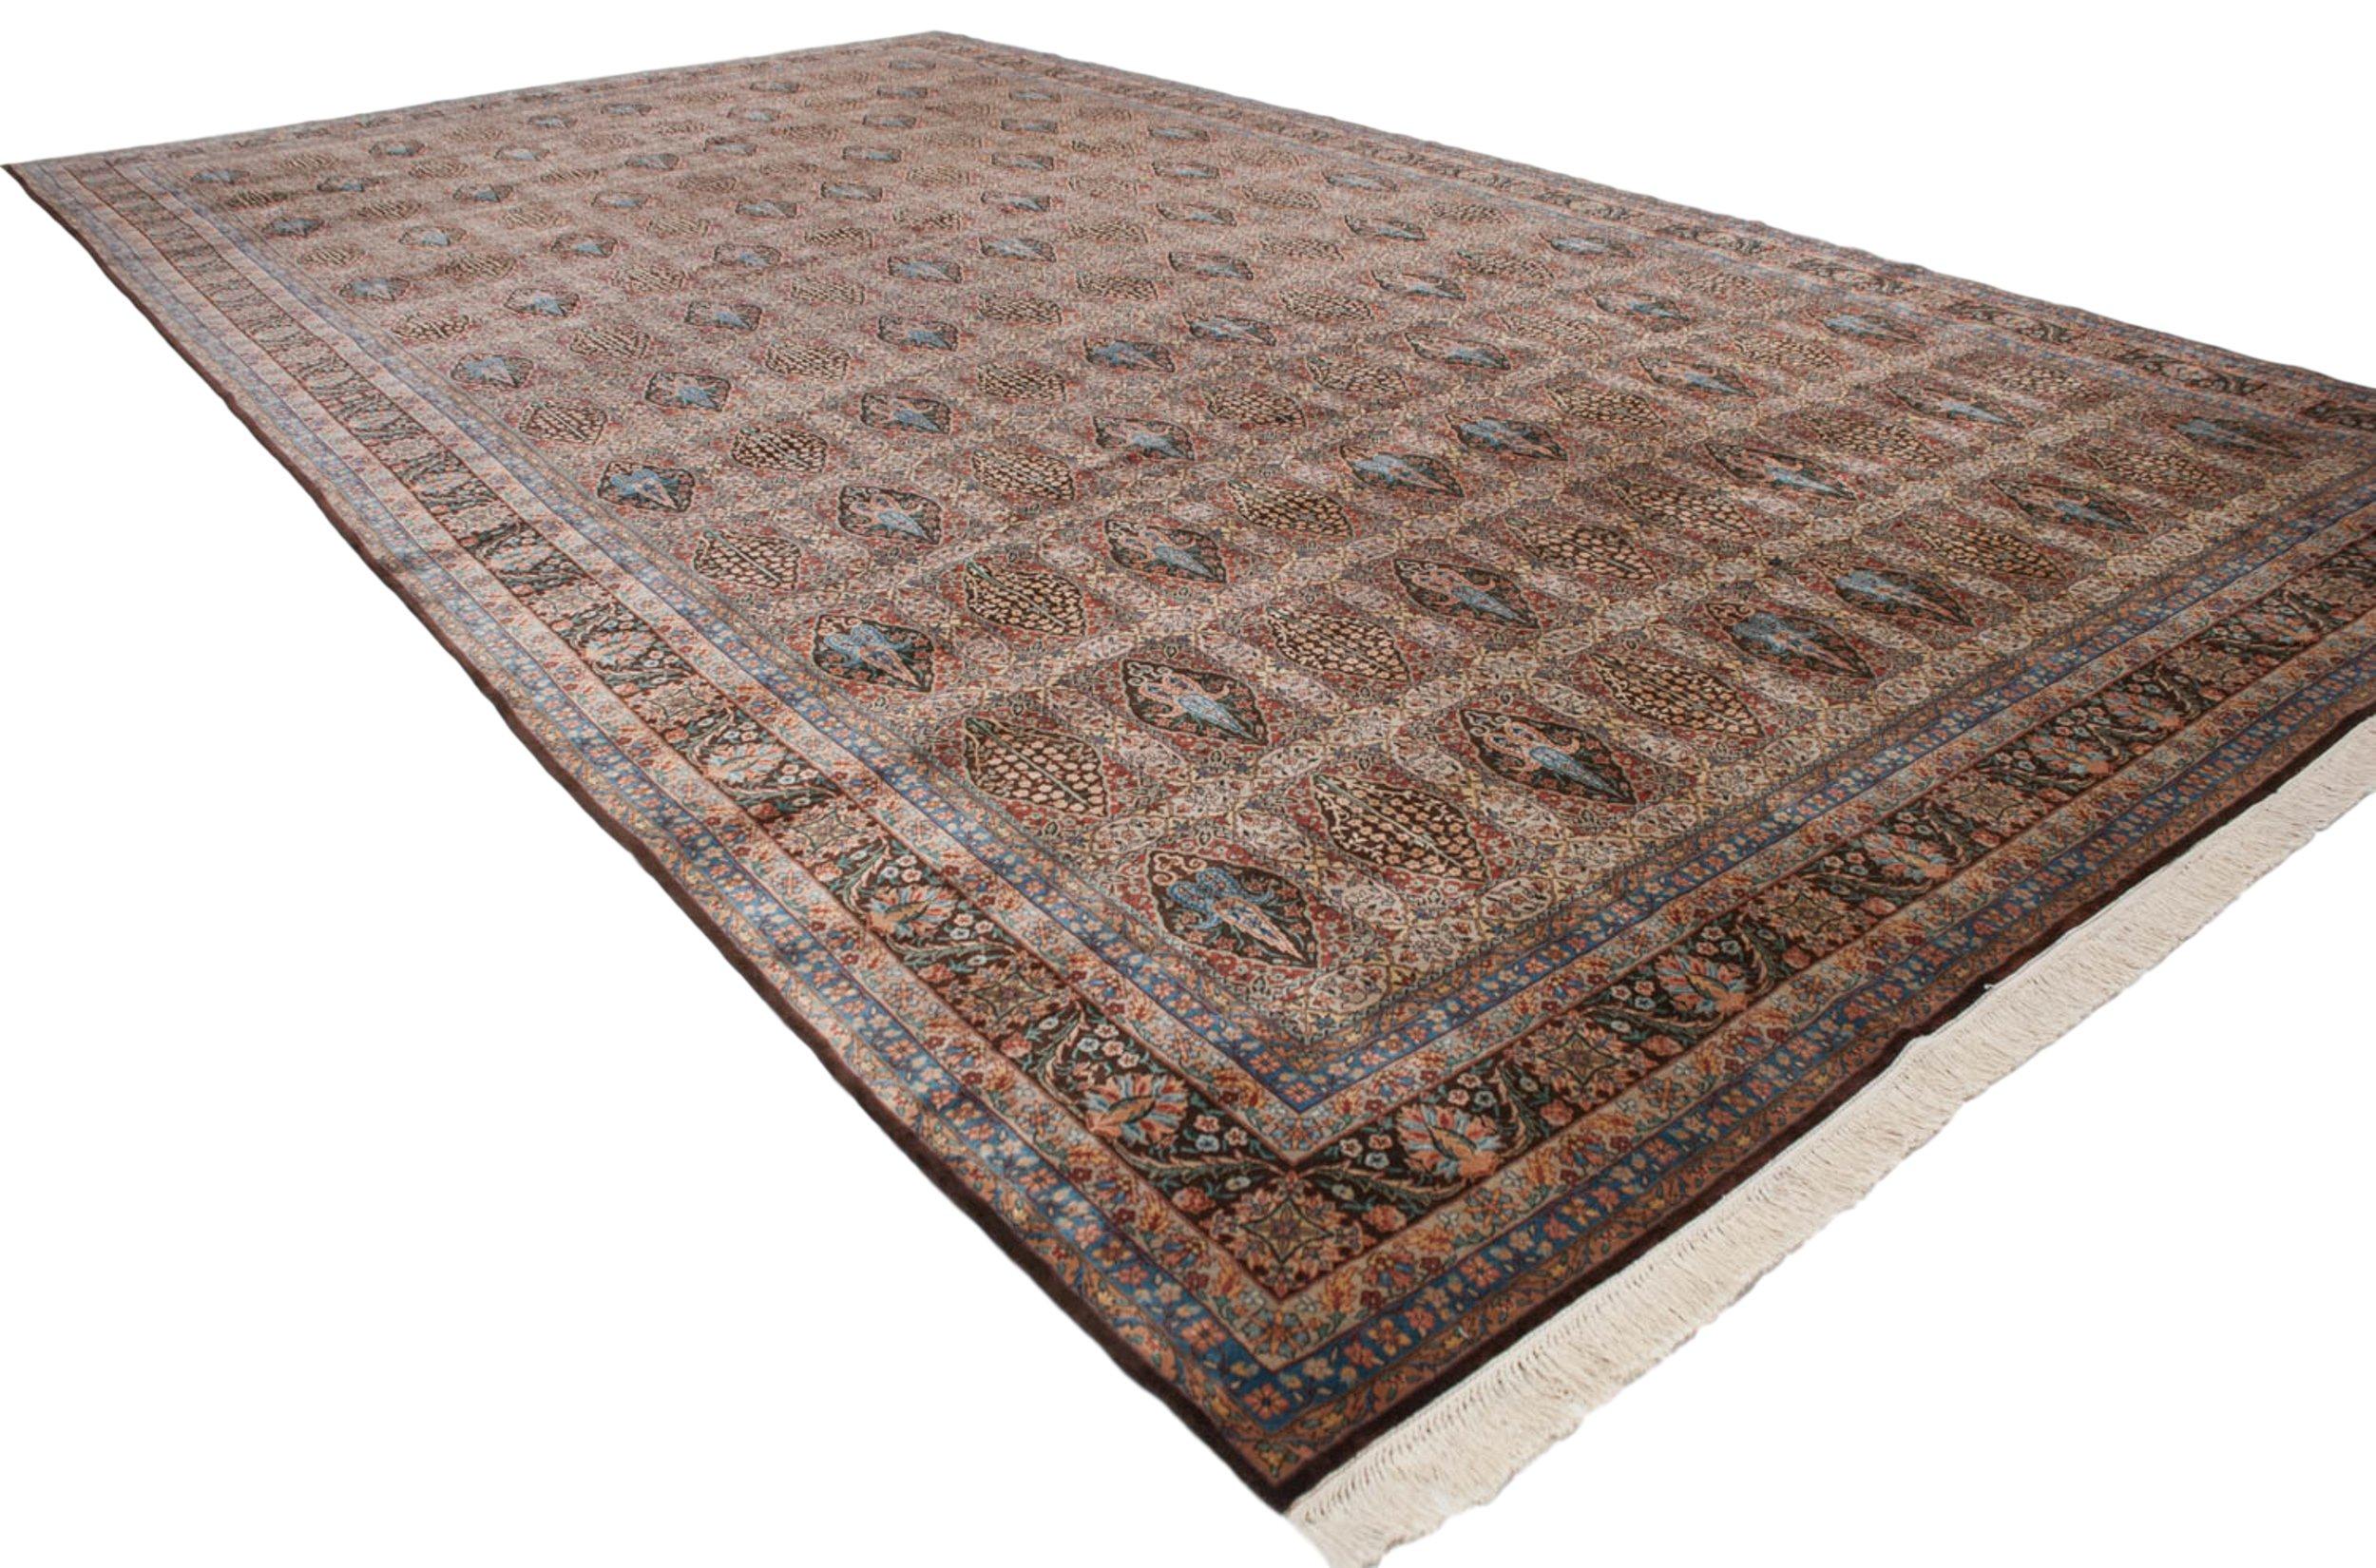 Vintage Bulgarian Tabriz Design Carpet In Excellent Condition For Sale In Katonah, NY